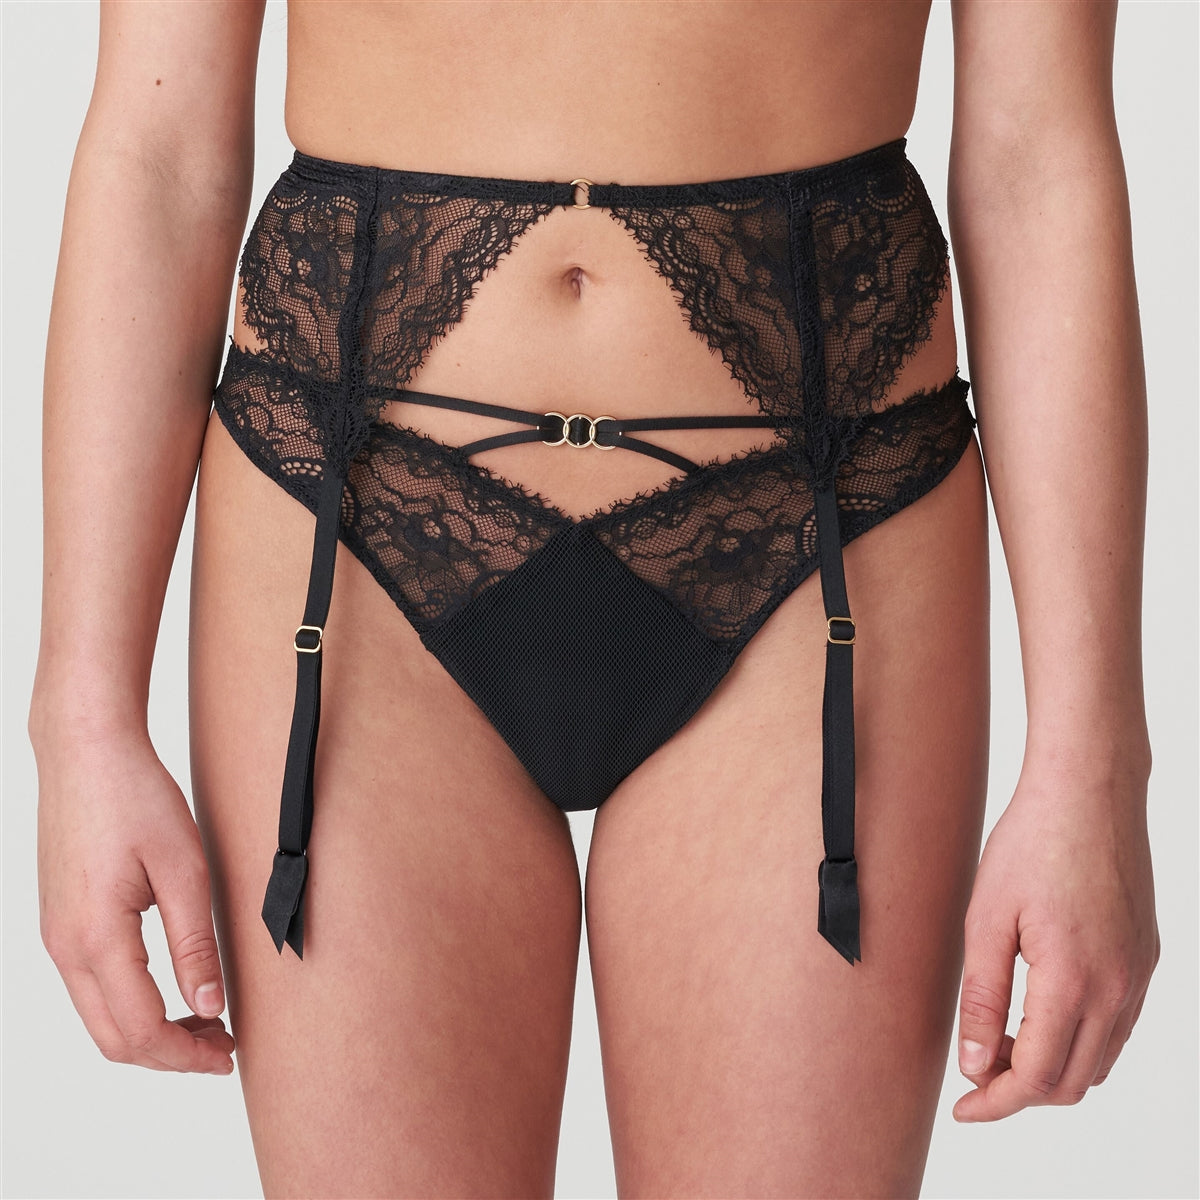 Junoo black suspender belt - a playful accessory you can wear on the hips or off the waist.